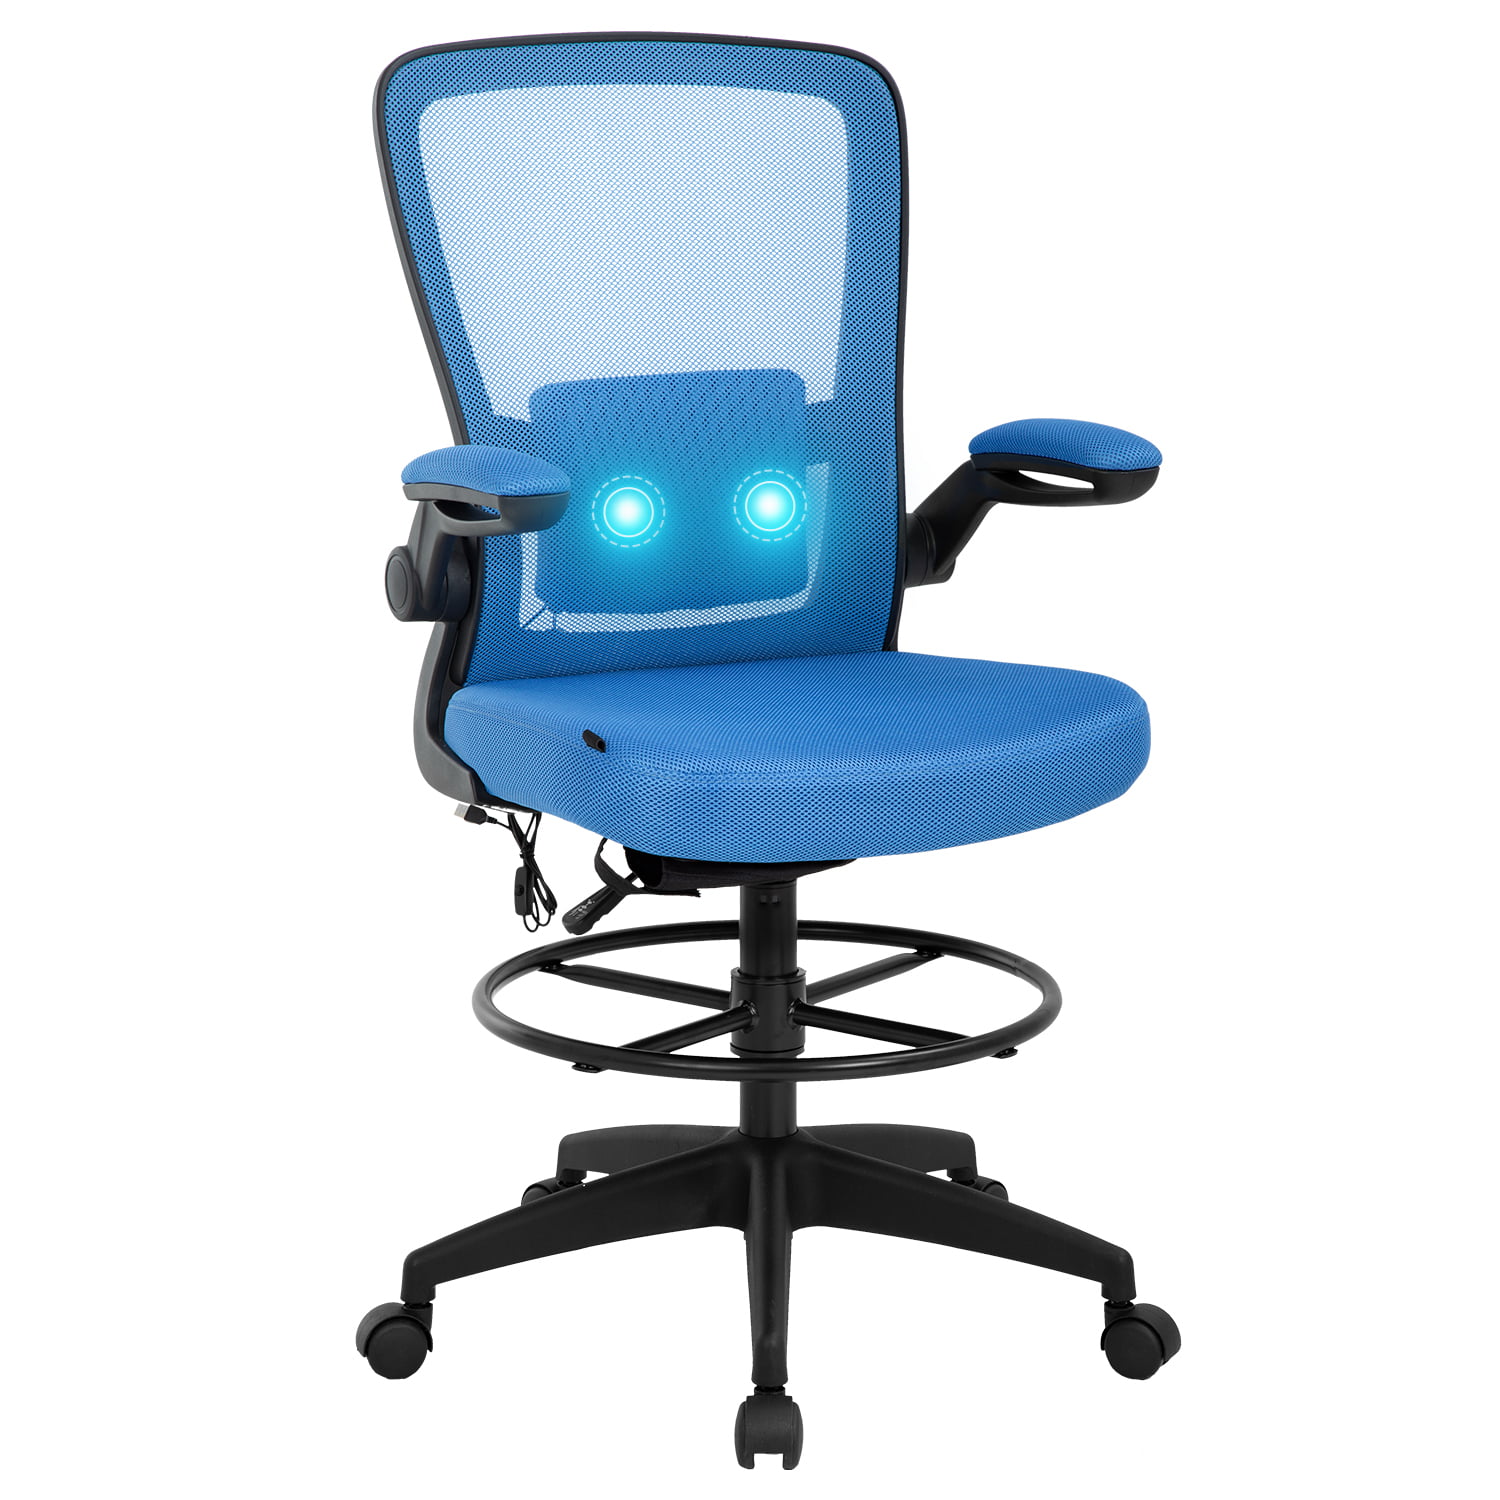 Drafting Chair Office Chair Desk Chair with Lumbar Support Flip Up Arms